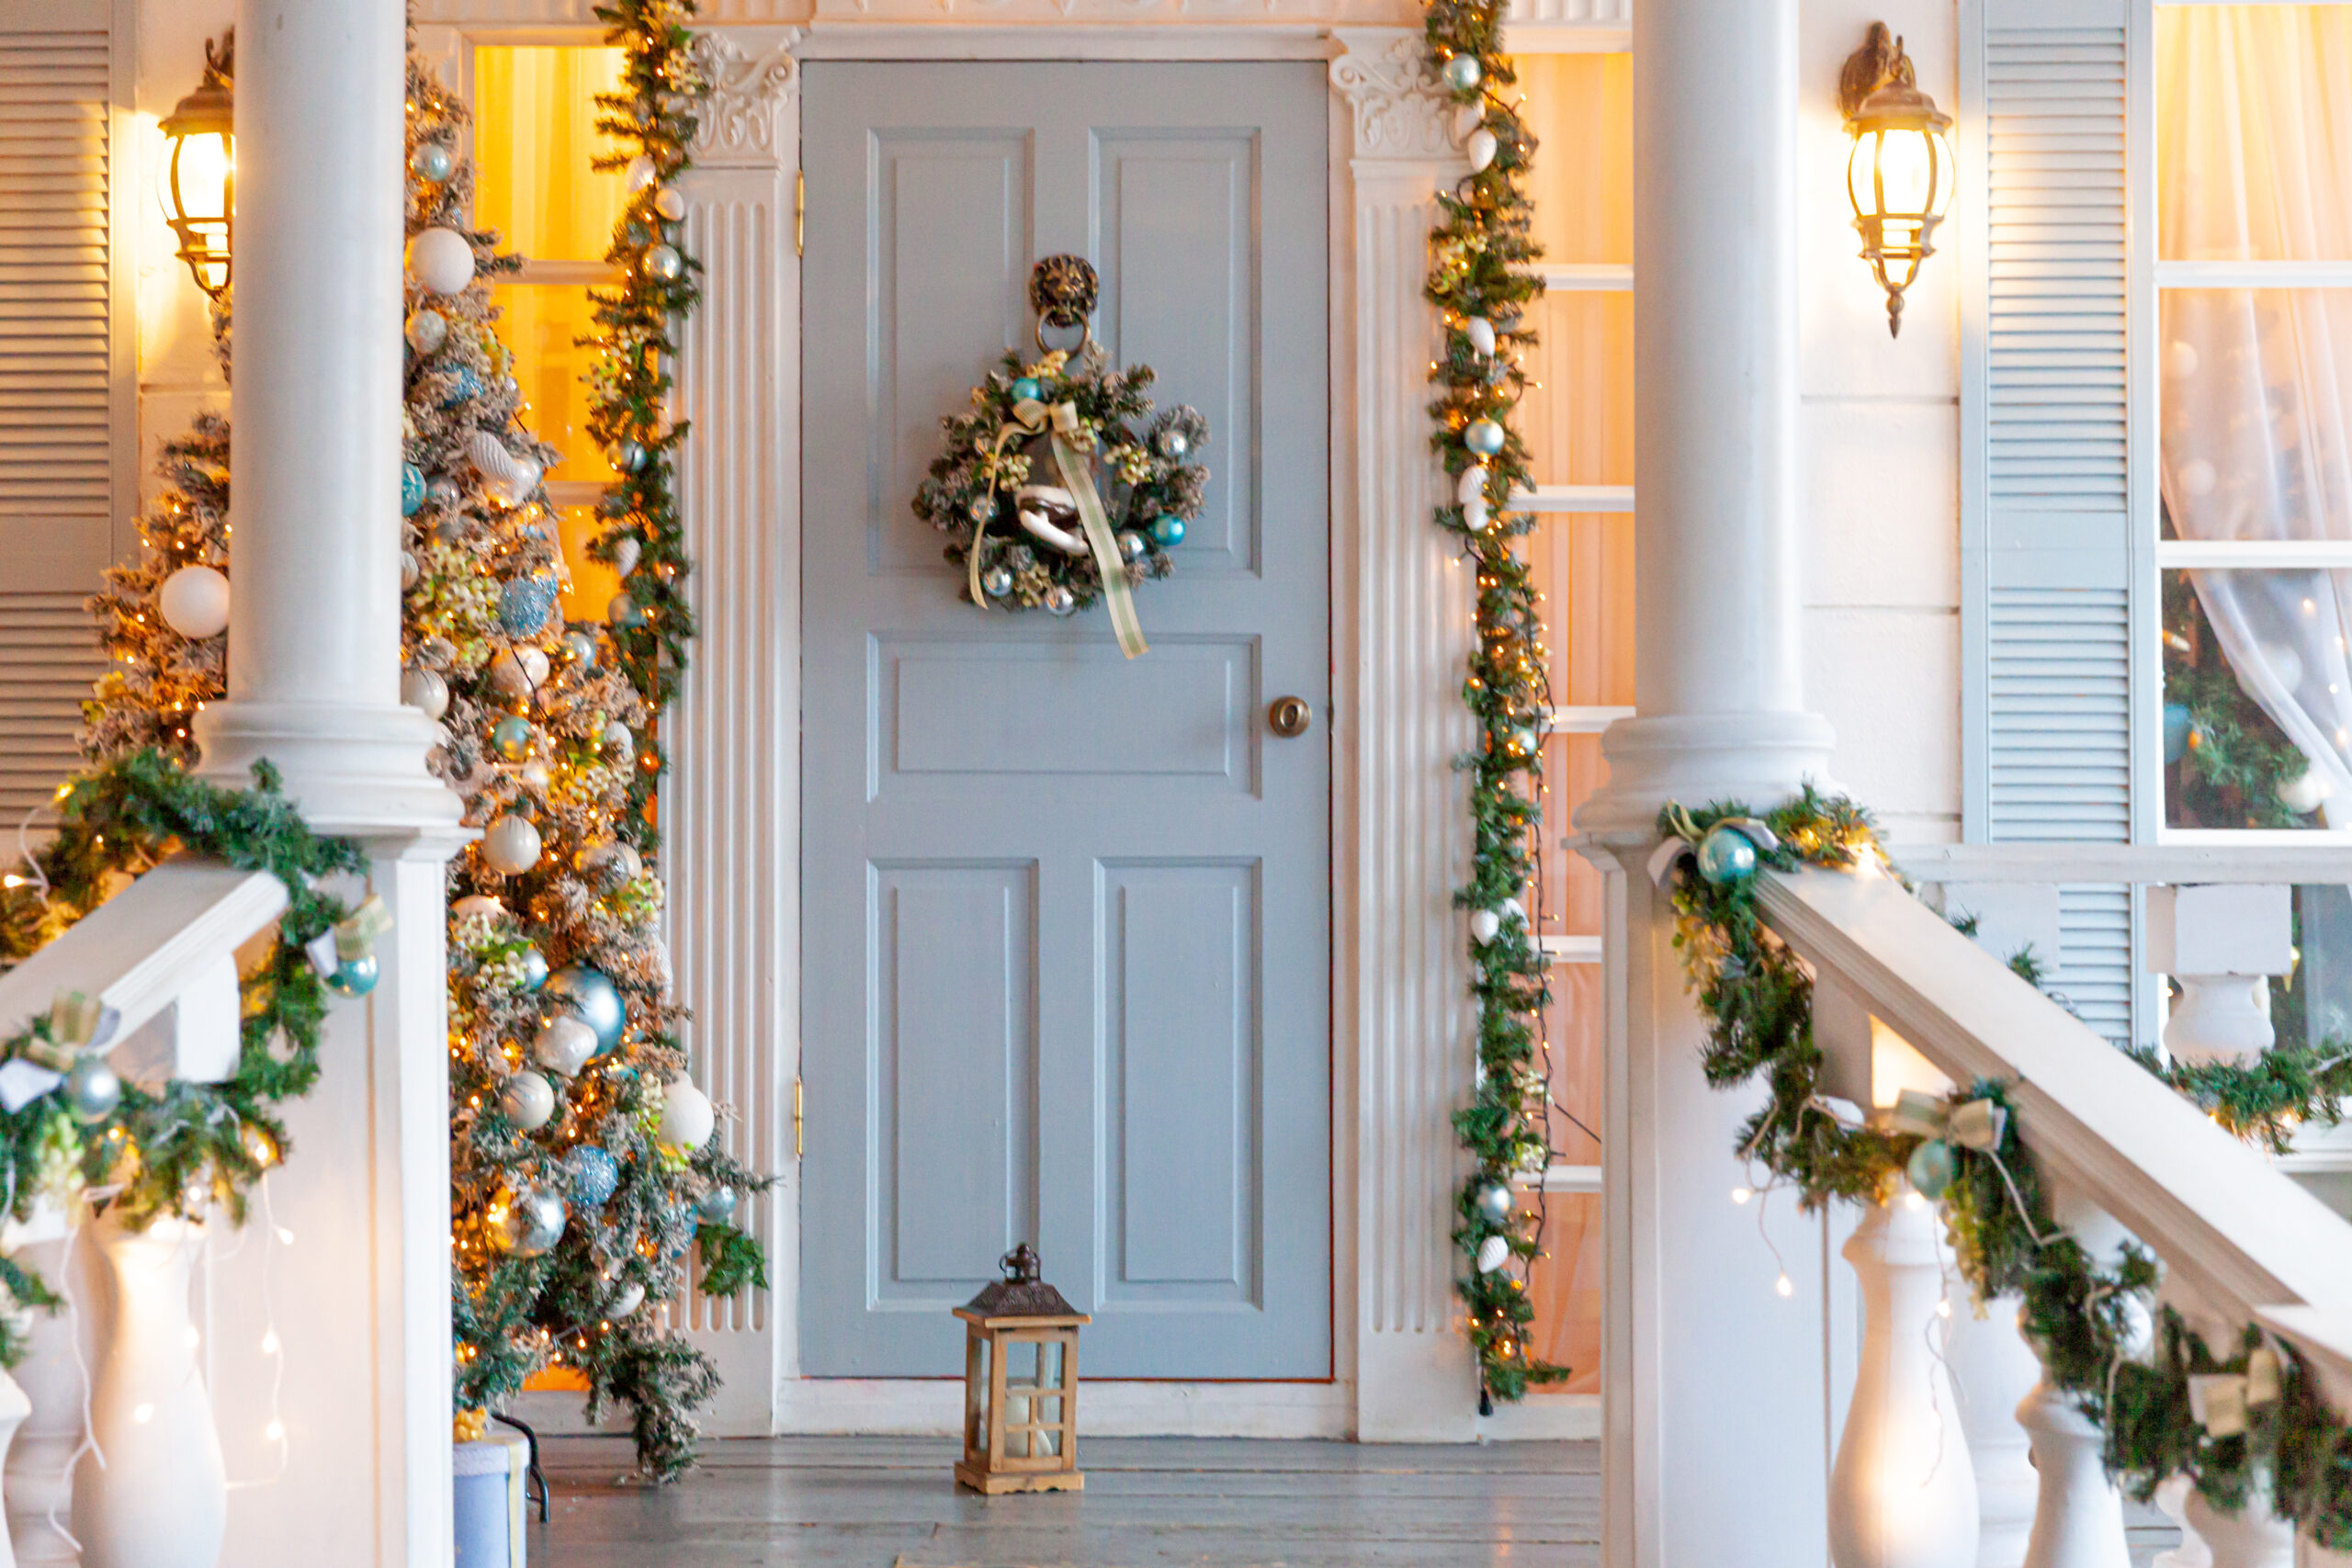 10 FESTIVE WAYS TO DECORATE FOR THE HOLIDAYS